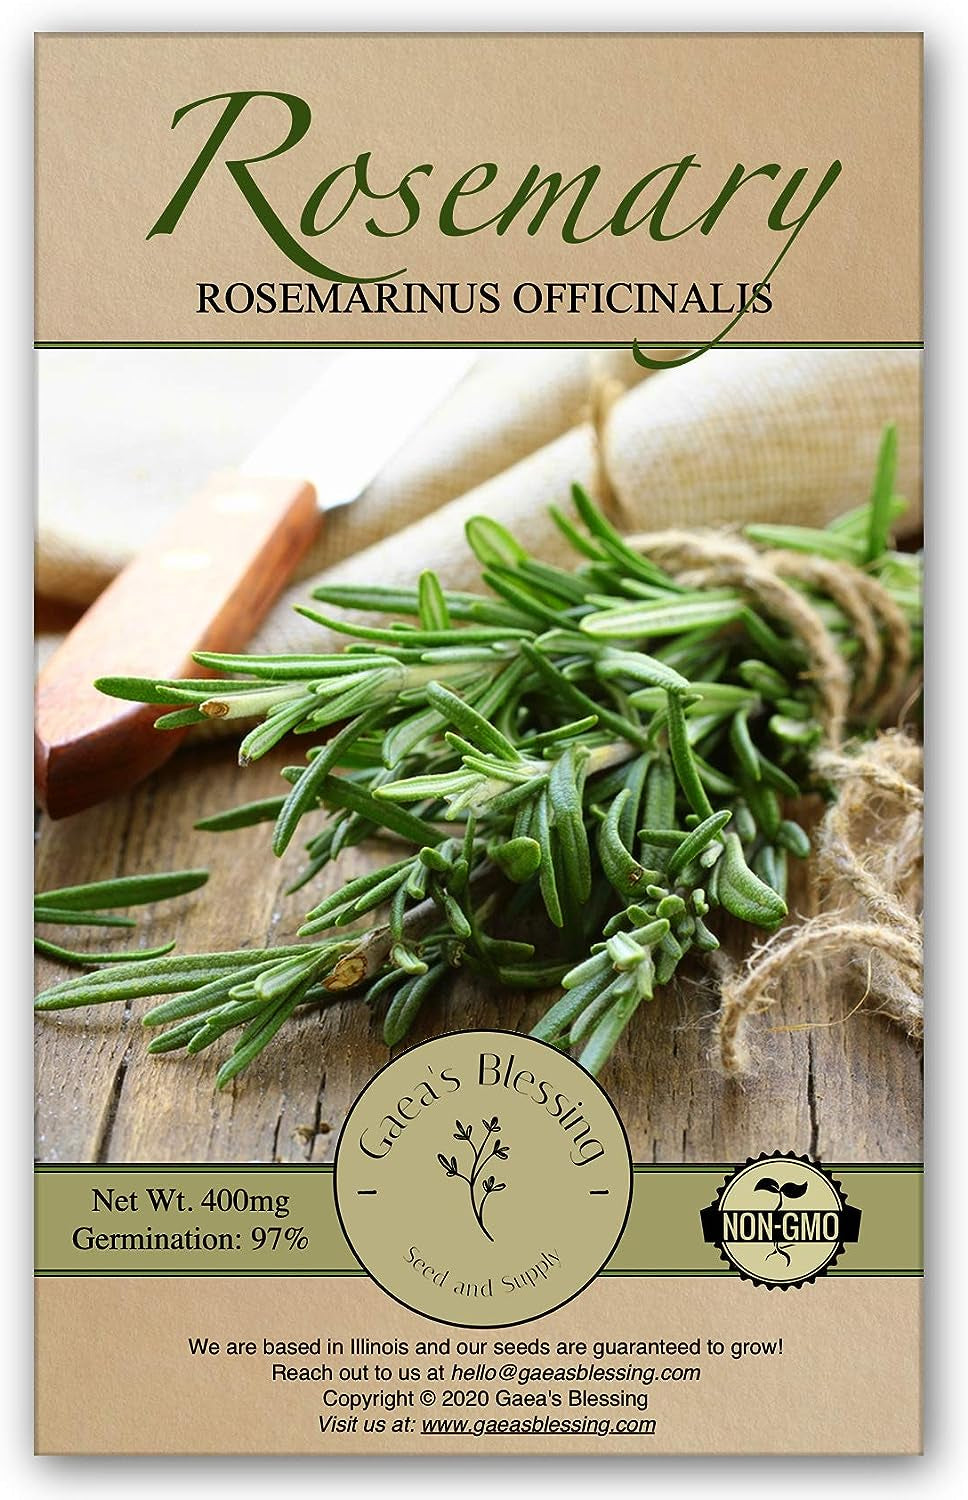 Seeds - Rosemary Seeds - Heirloom Non-Gmo Seeds with Easy to Follow Instructions 97% Germination Rate (Single Pack)